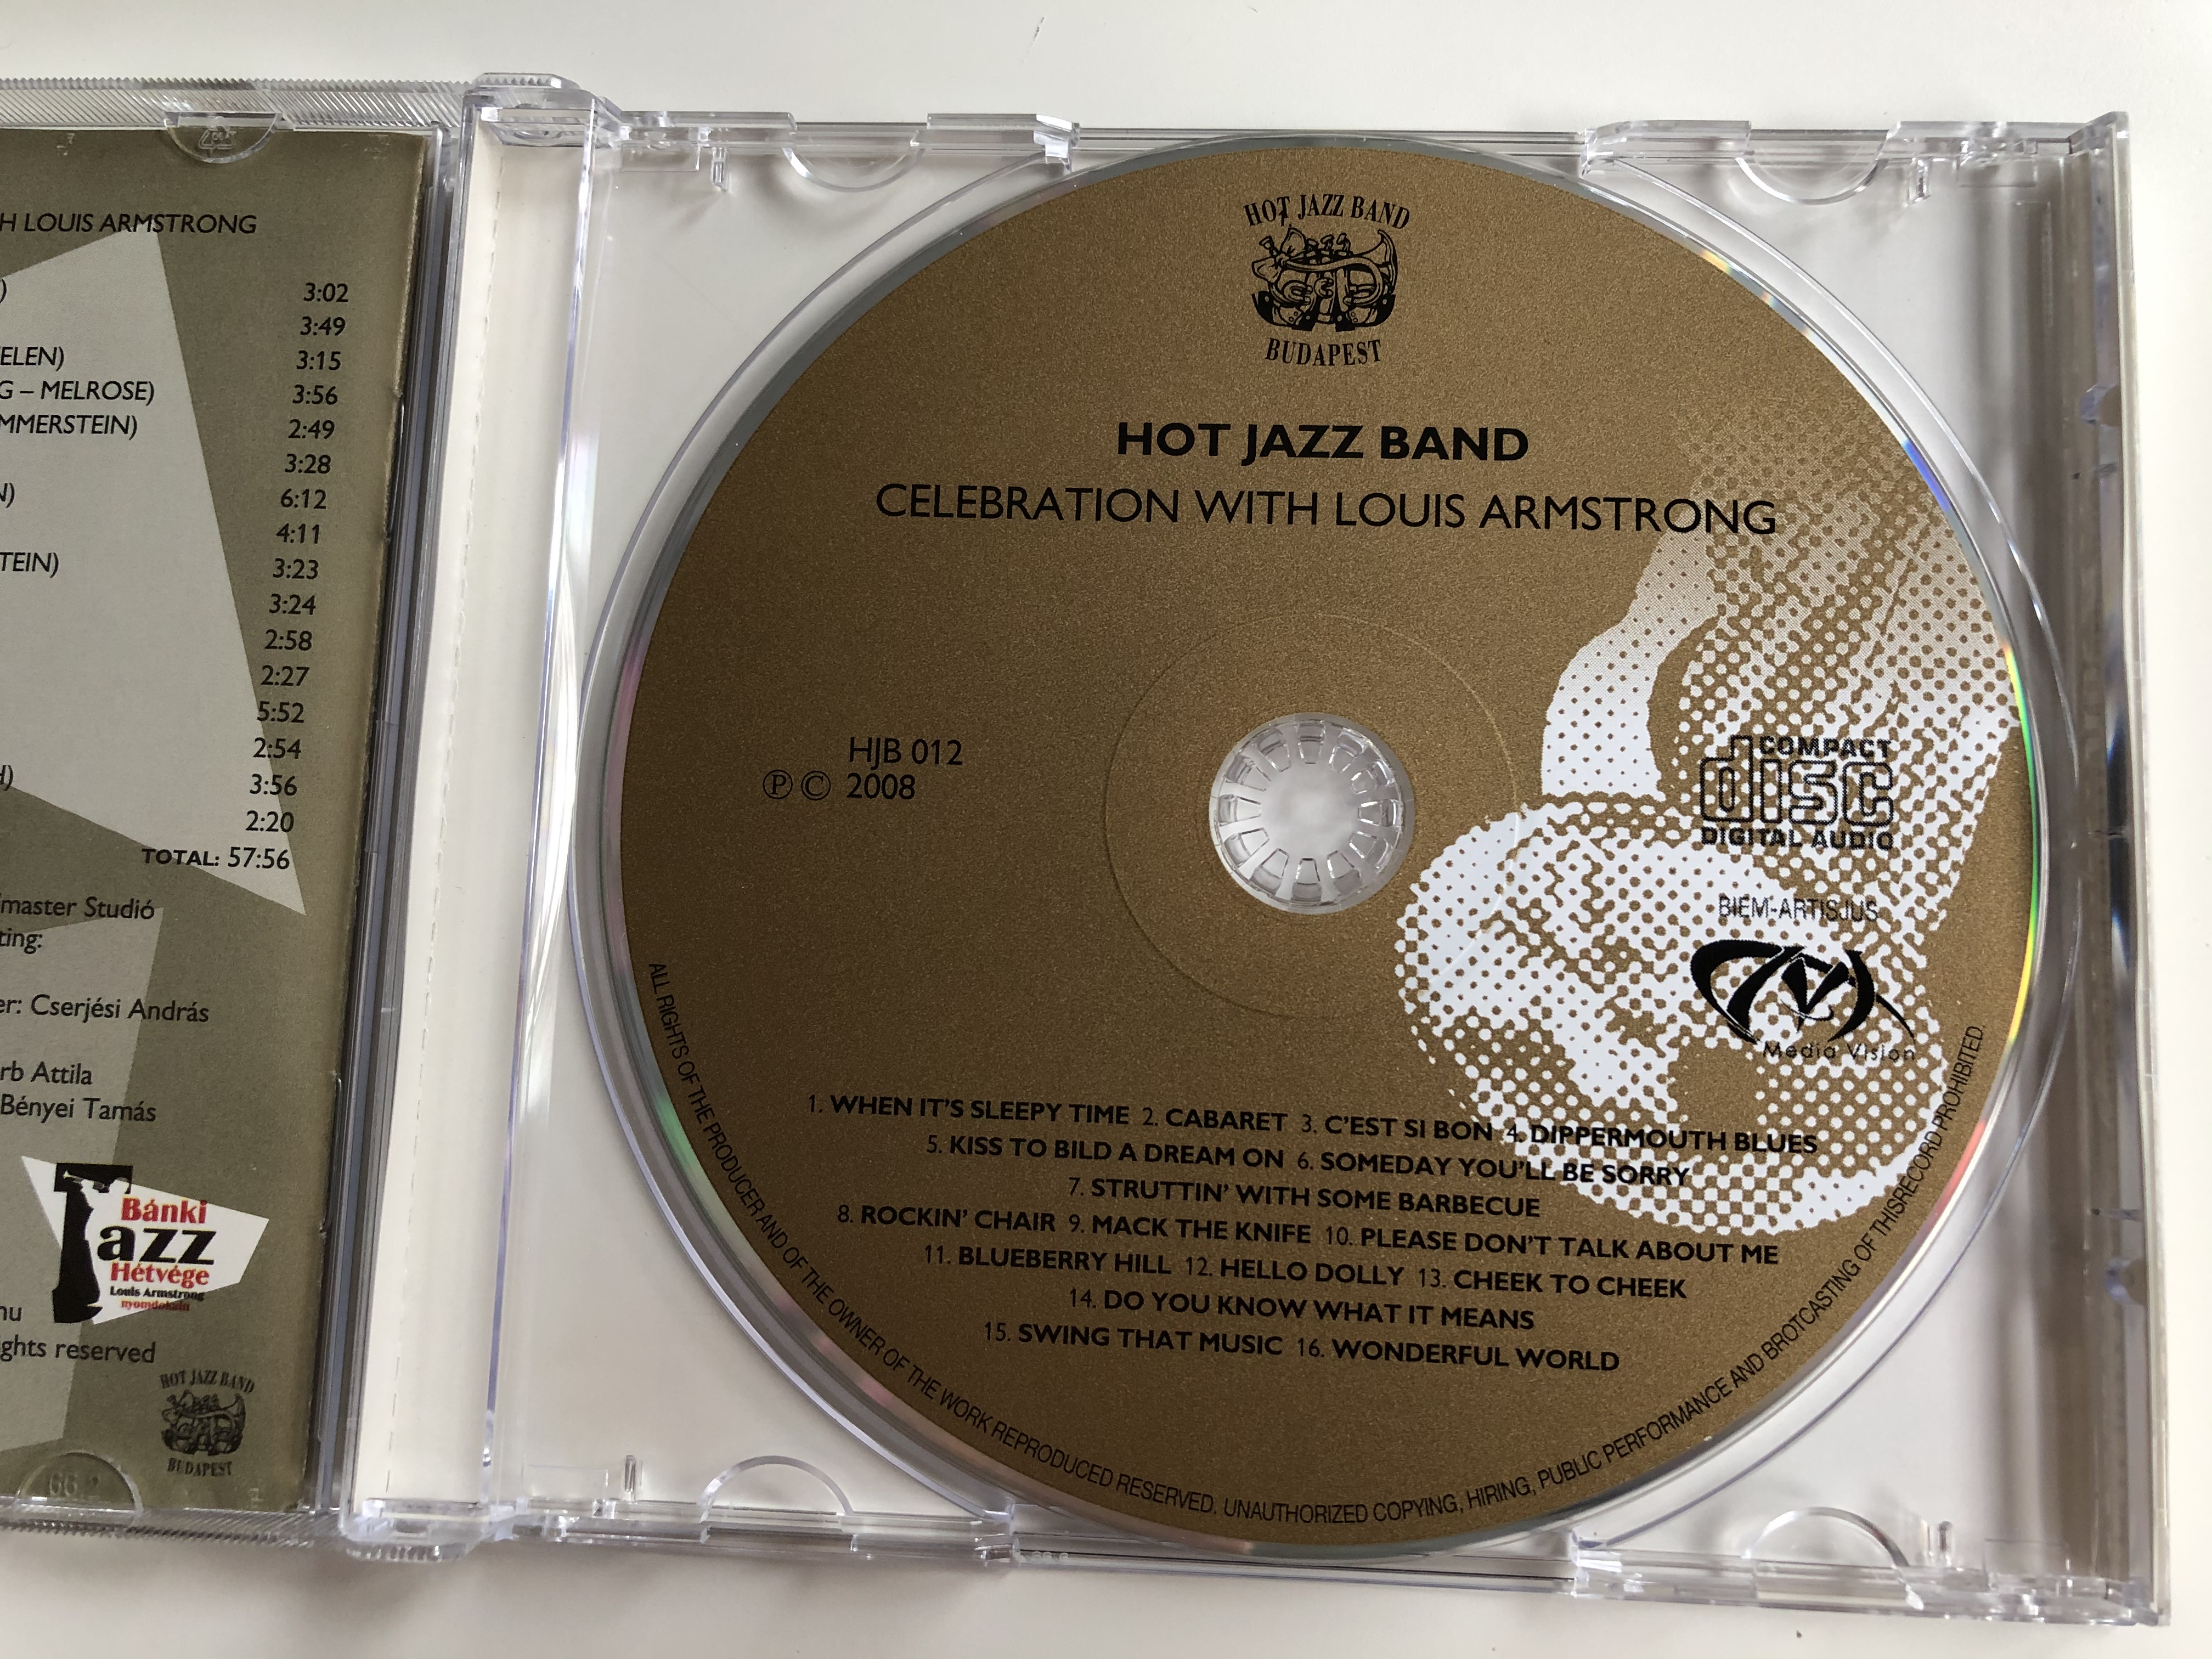 hot-jazz-band-celebration-with-louis-armstrong-hot-jazz-band-audio-cd-2008-hjb-012-6-.jpg